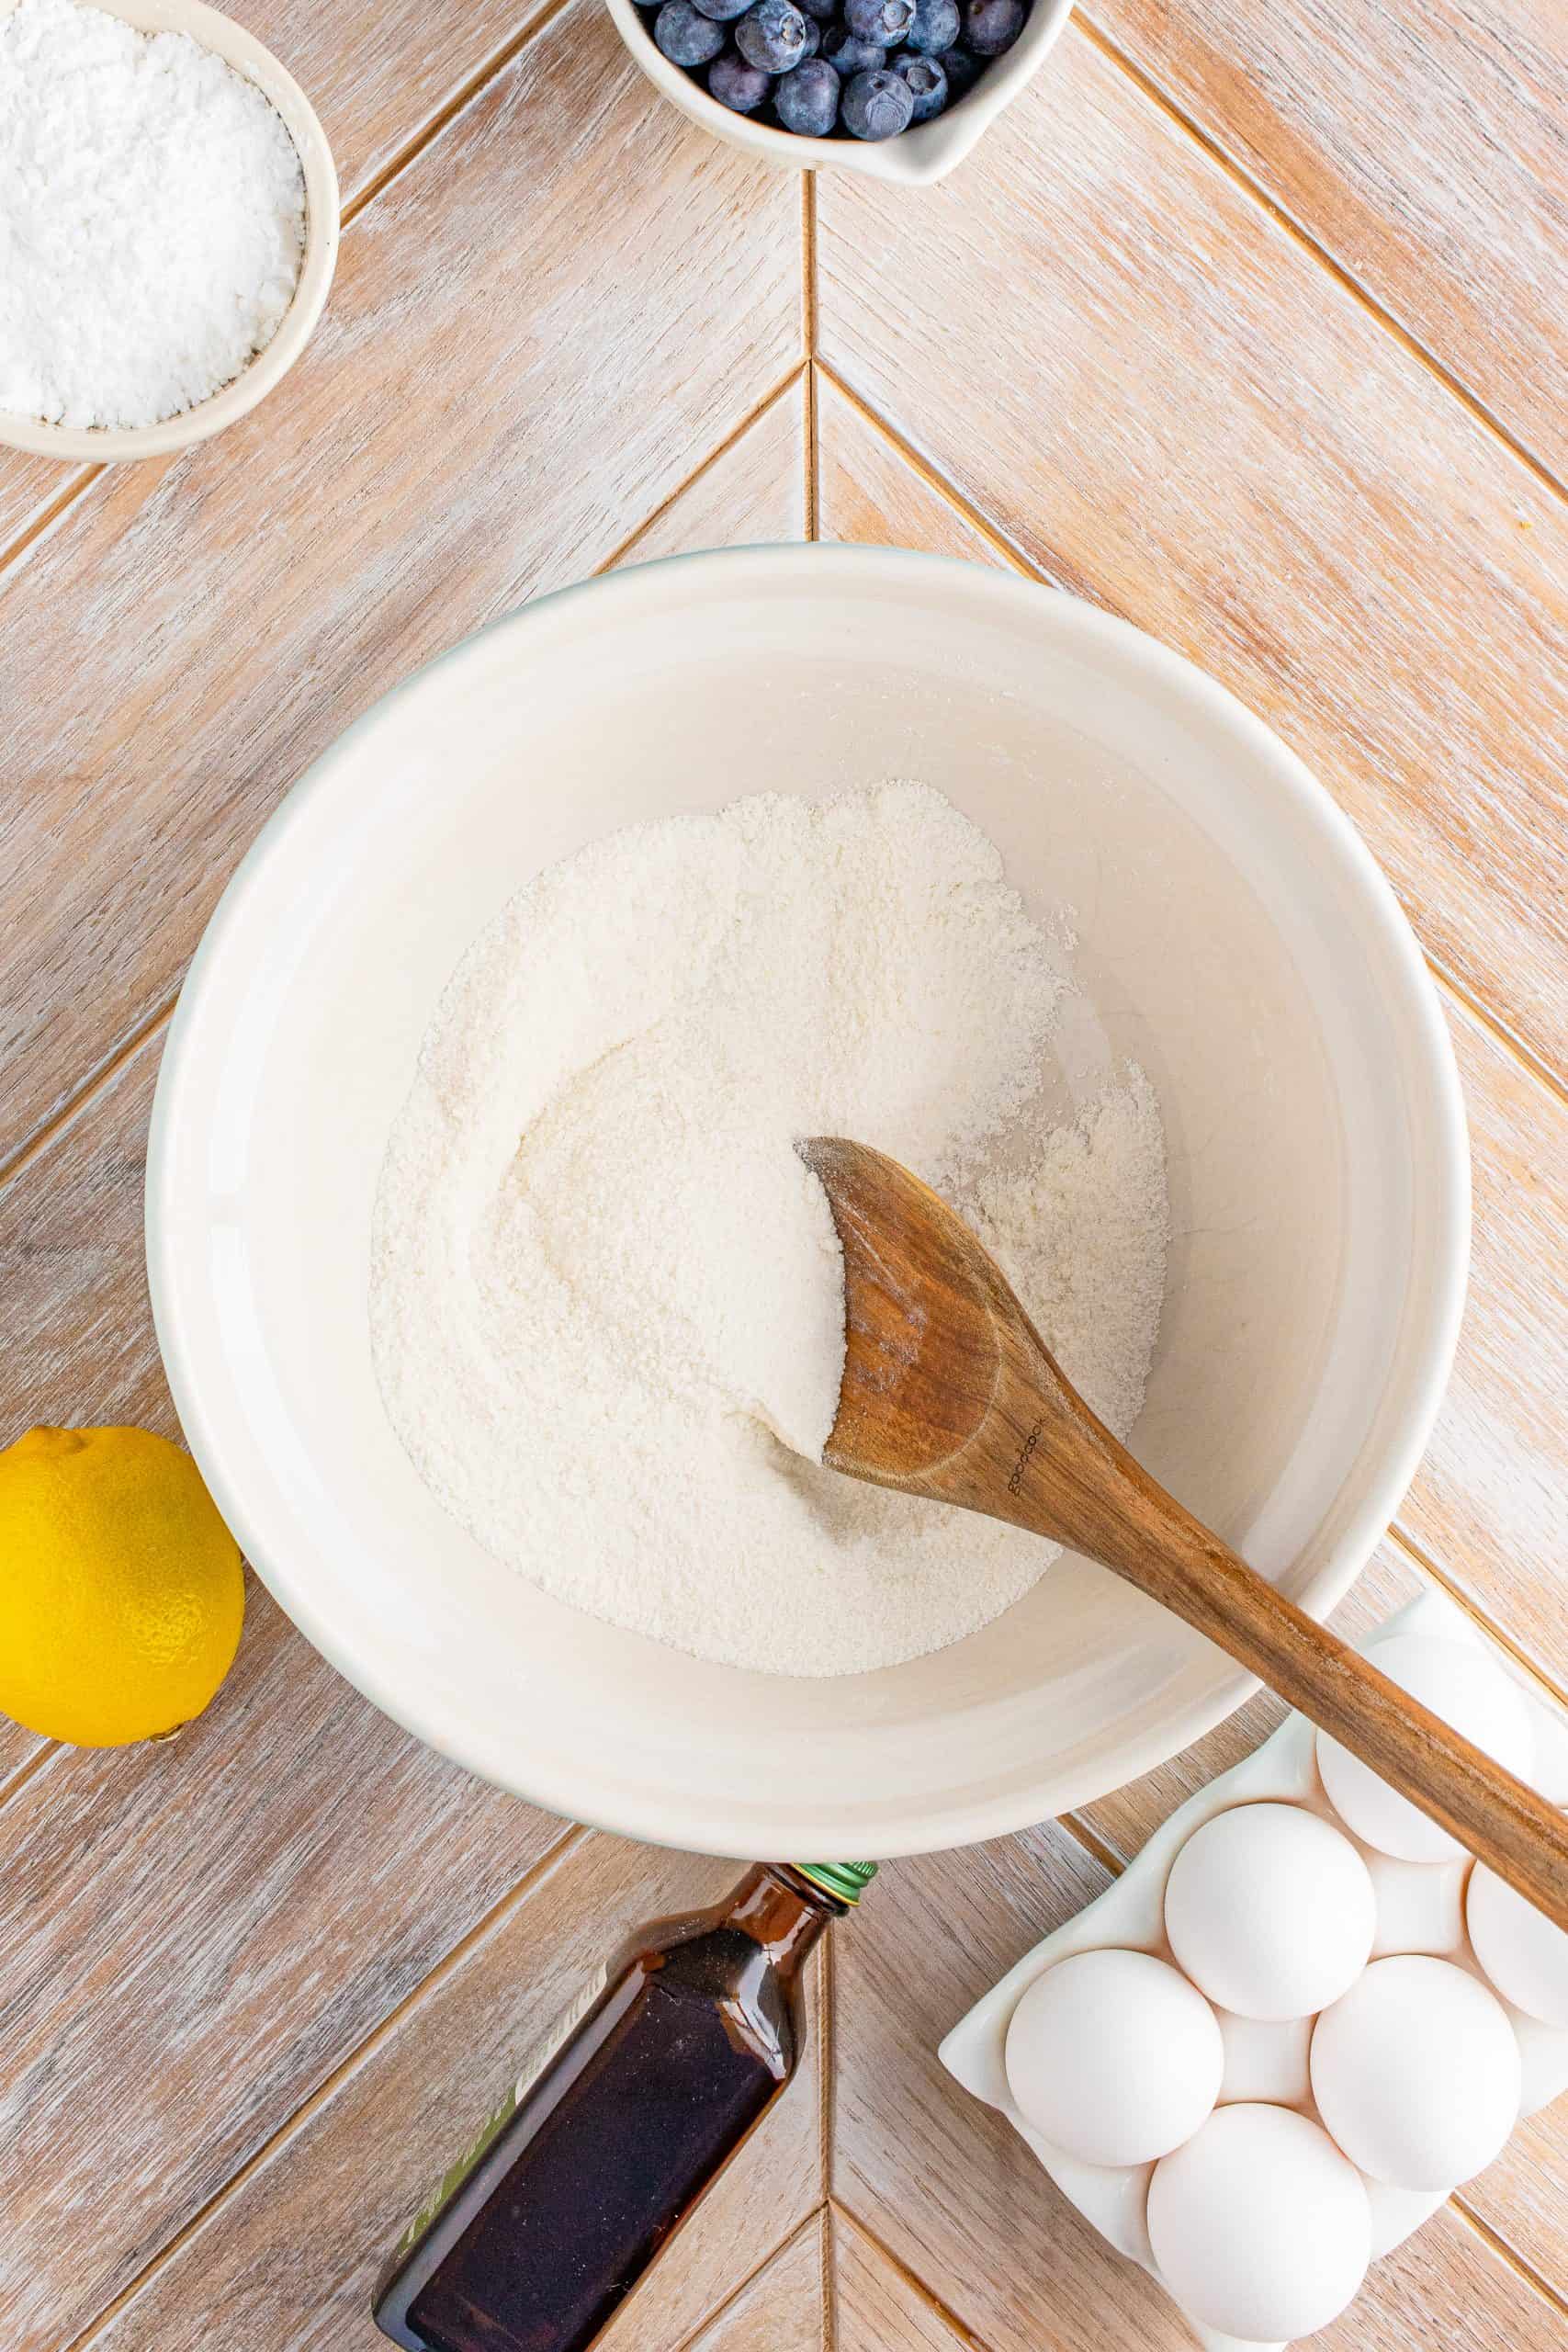 Flour and sugar in white bowl being stirred with wooden spoon.